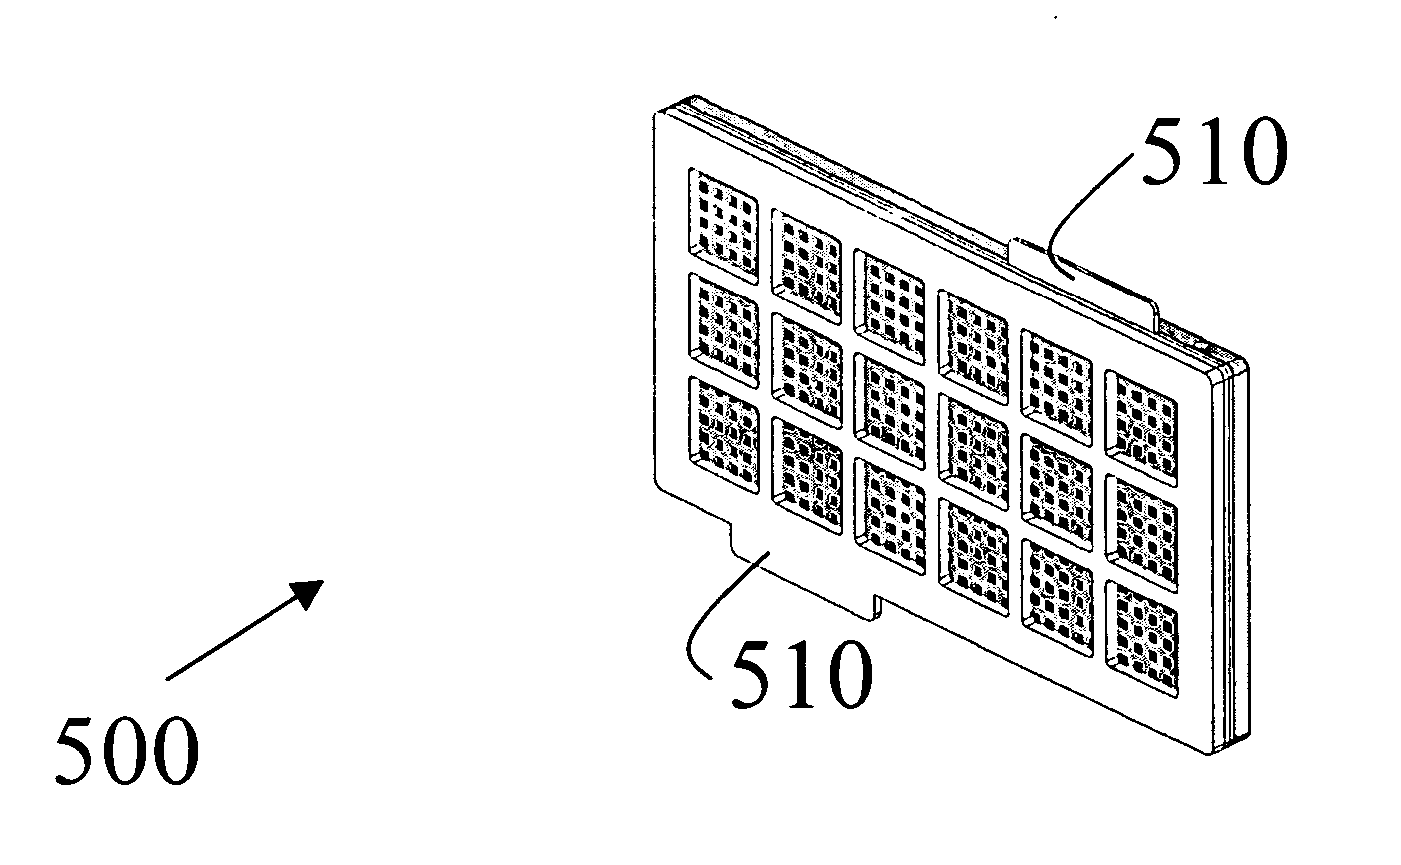 Articles of clothing and personal gear with on-demand power supply for electrical devices